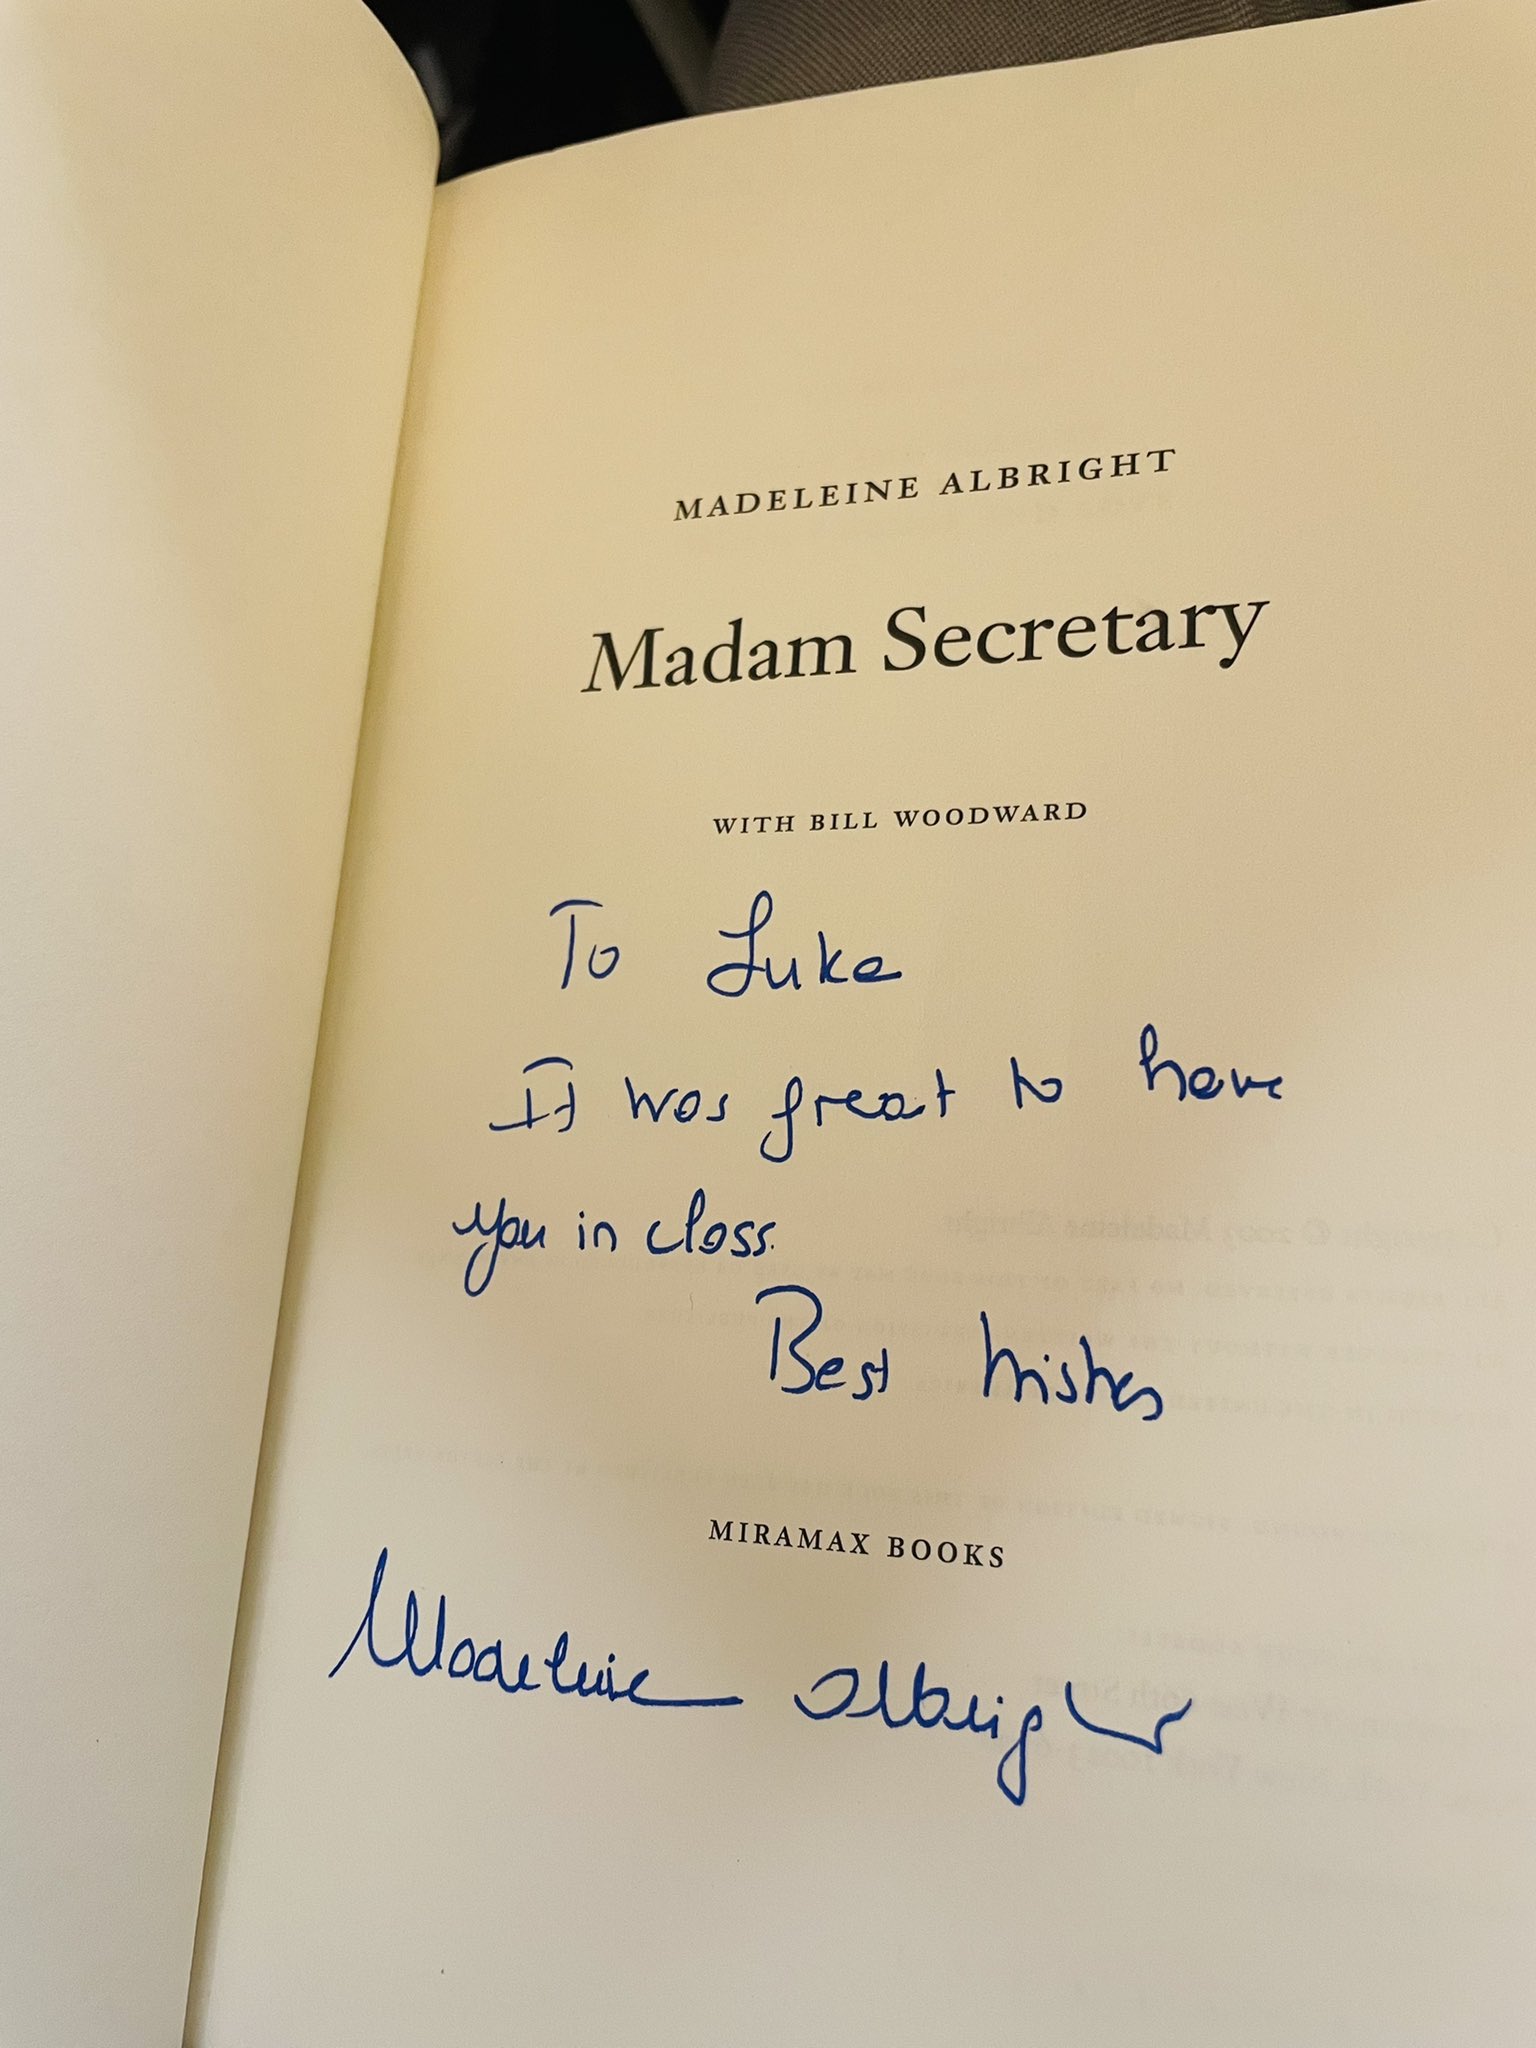 First page of Albright's book "Madam Secretary" with a handwritten note that reads "To Luka It was great to have you in class. Bet wishes Madeleine Albright"